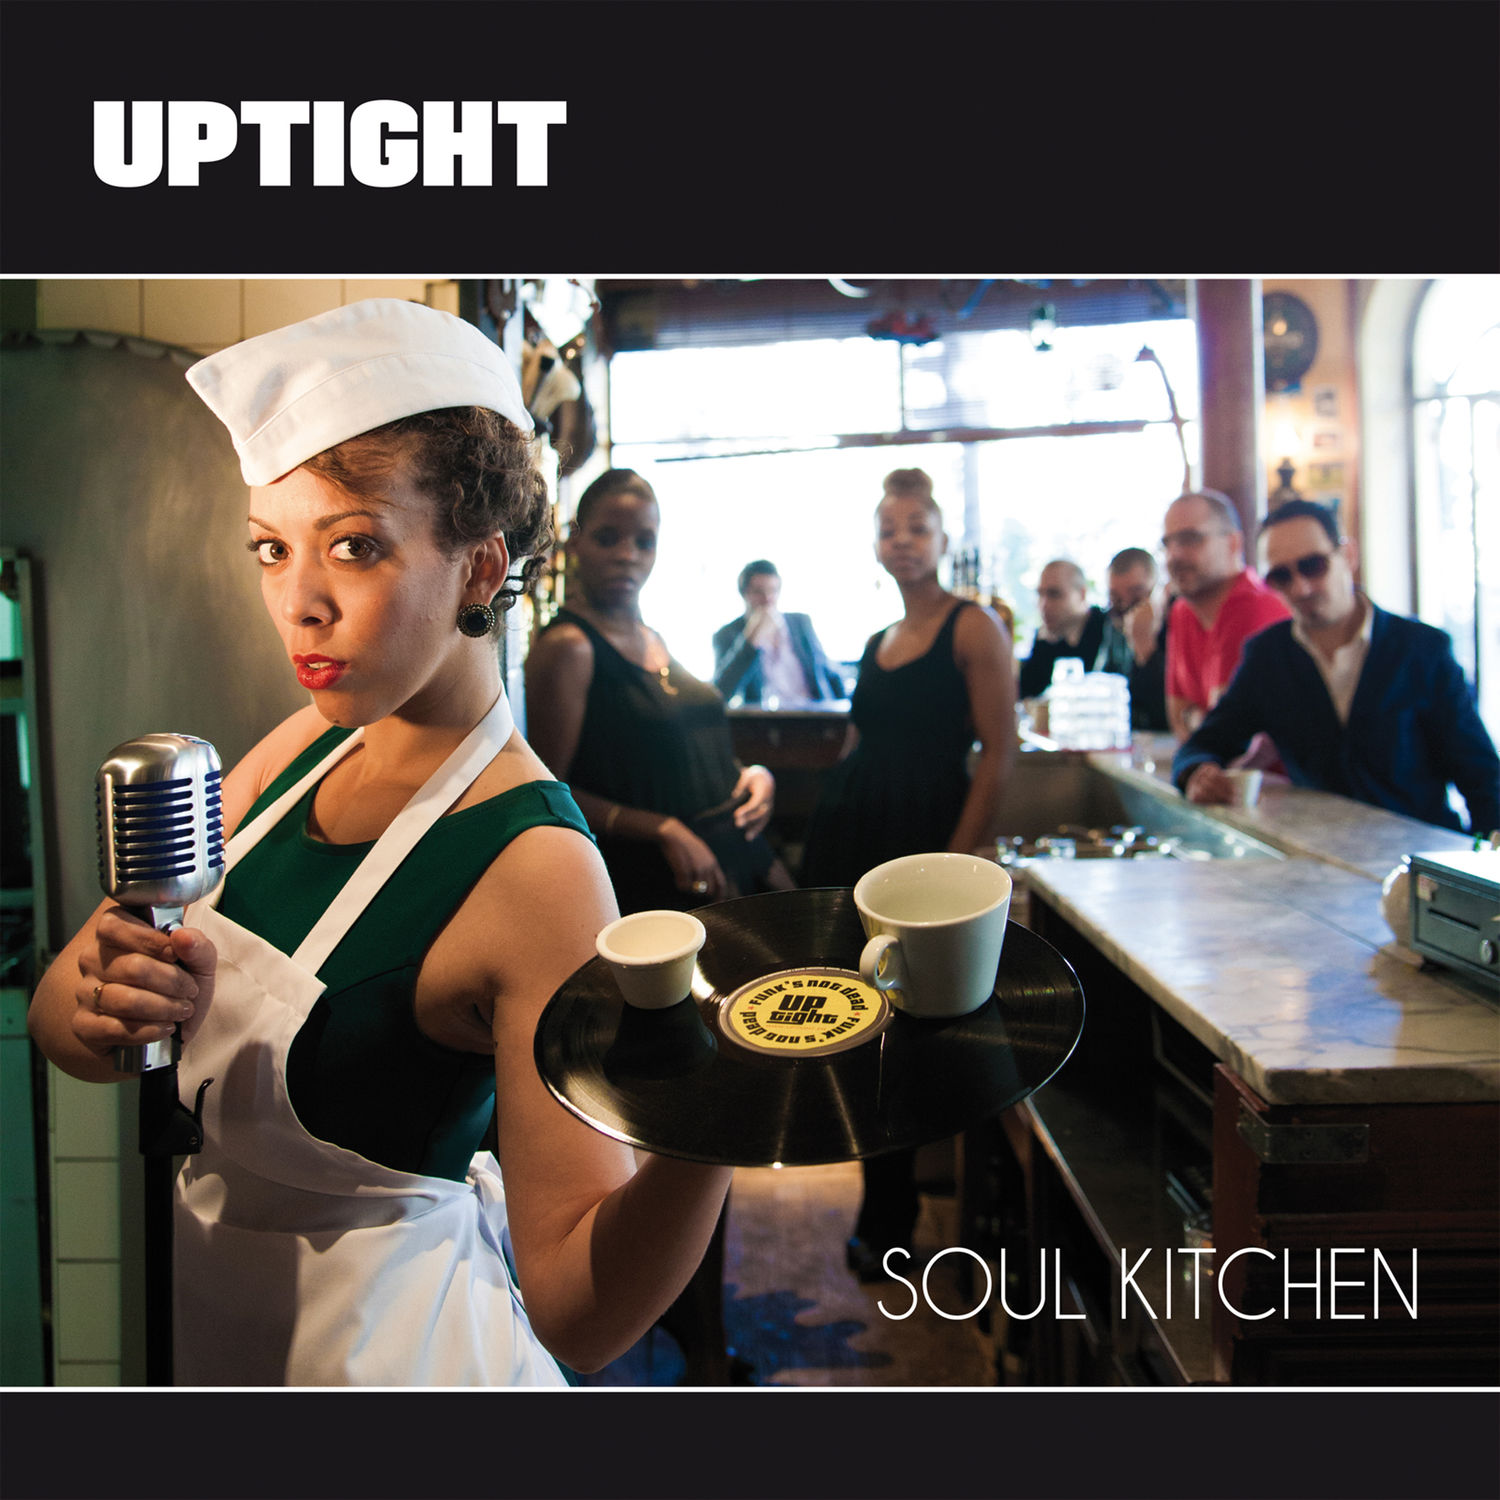 Uptight – Soul Kitchen (Deluxe Remastered Edition) (2021) [FLAC 24bit/48kHz]